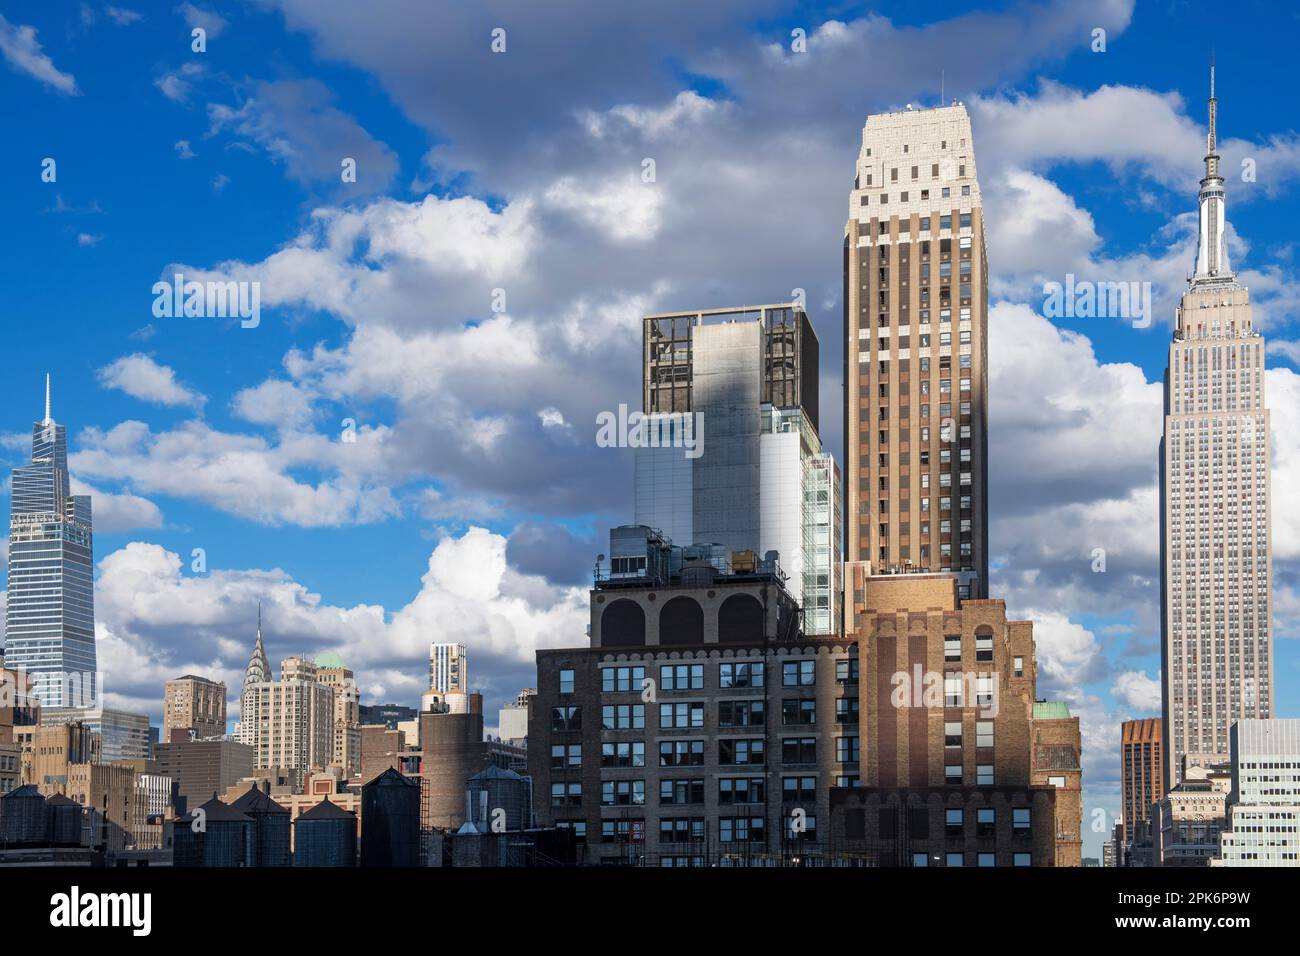 Empire State Building and the view of 34th Street, Summit One Vanderbilt, Chrysler Tower, Manhattan, New York City, USA Stock Photo